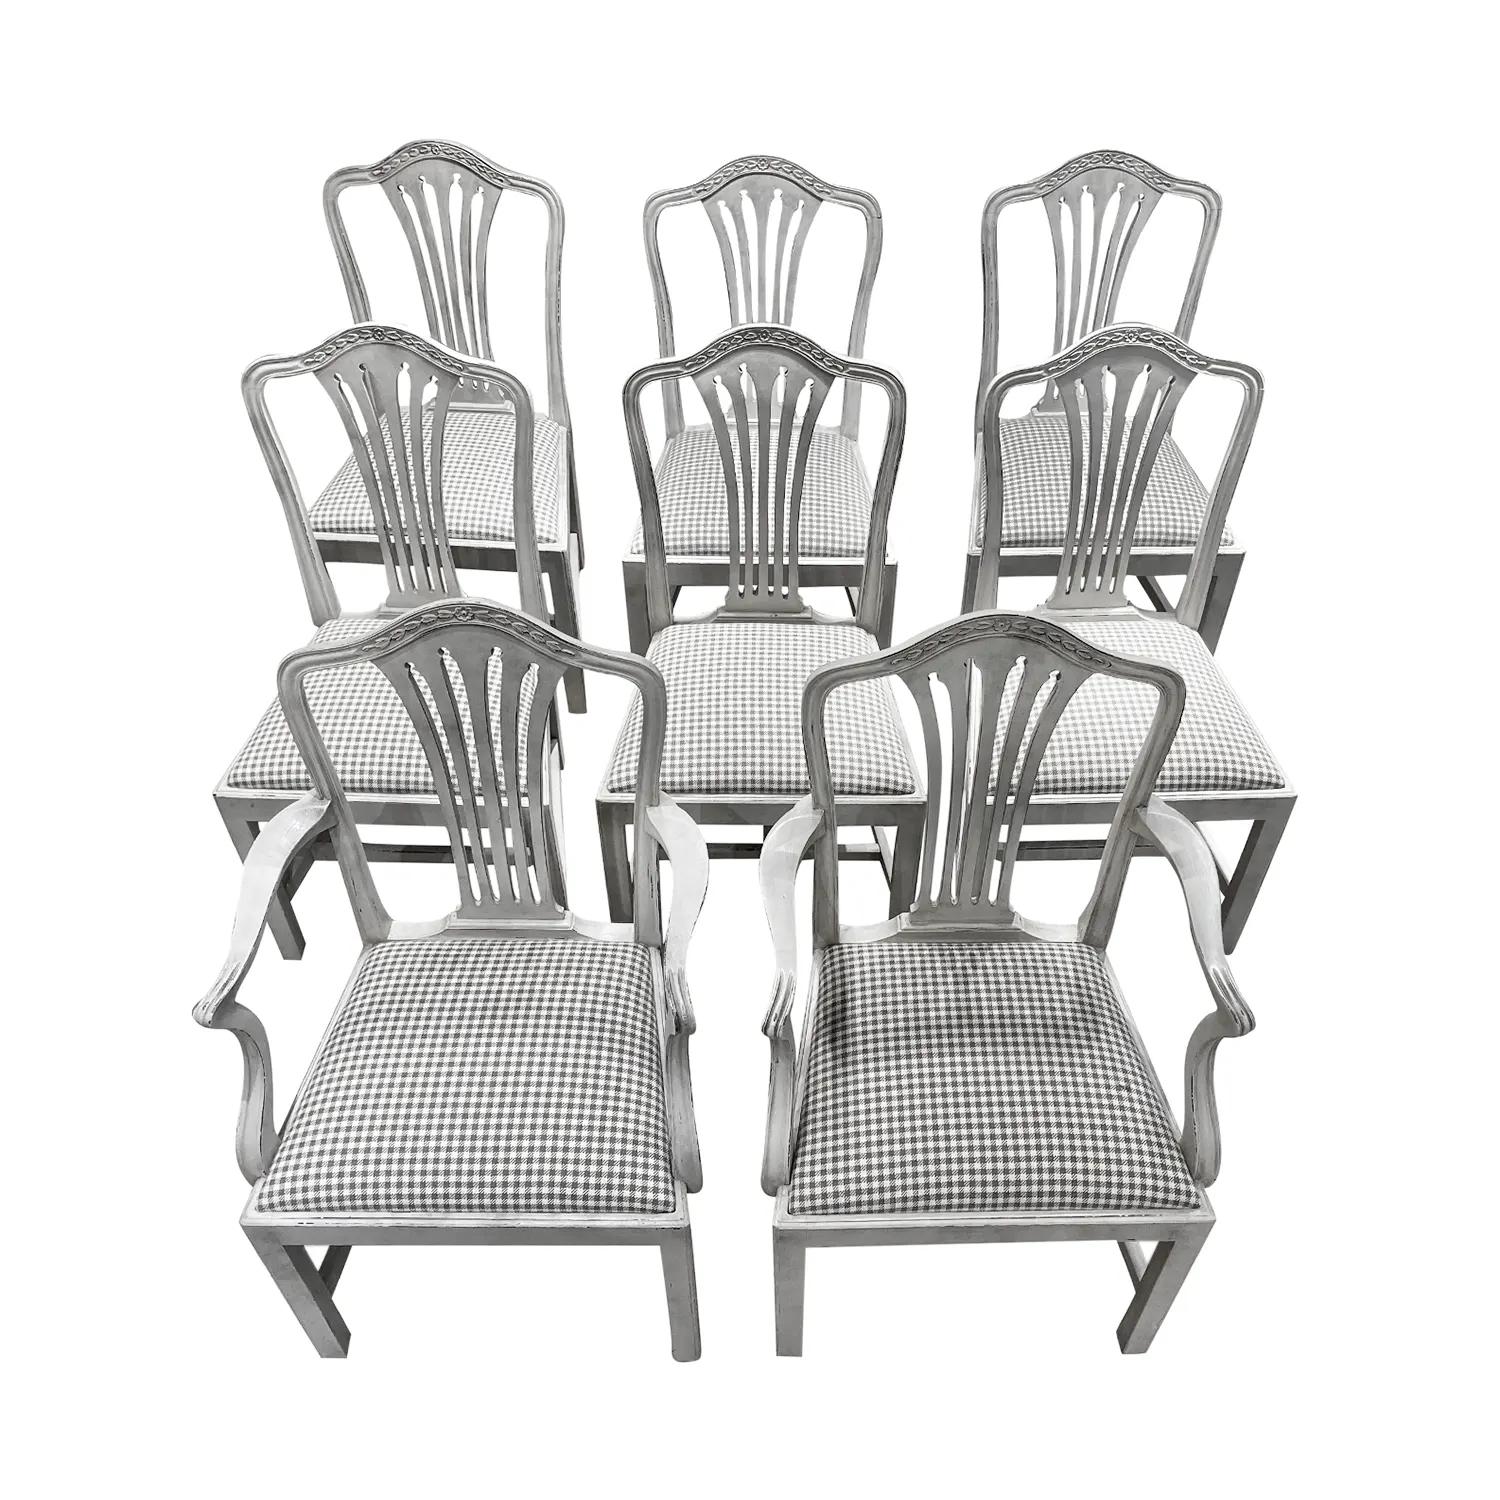 An antique Danish set of six side chairs and two armchairs in a chalky grey finish made of hand crafted Pinewood, in good condition. The Scandinavian chairs have a rounded backrests and a centered floral decoration, possibly Denmark. The seats have